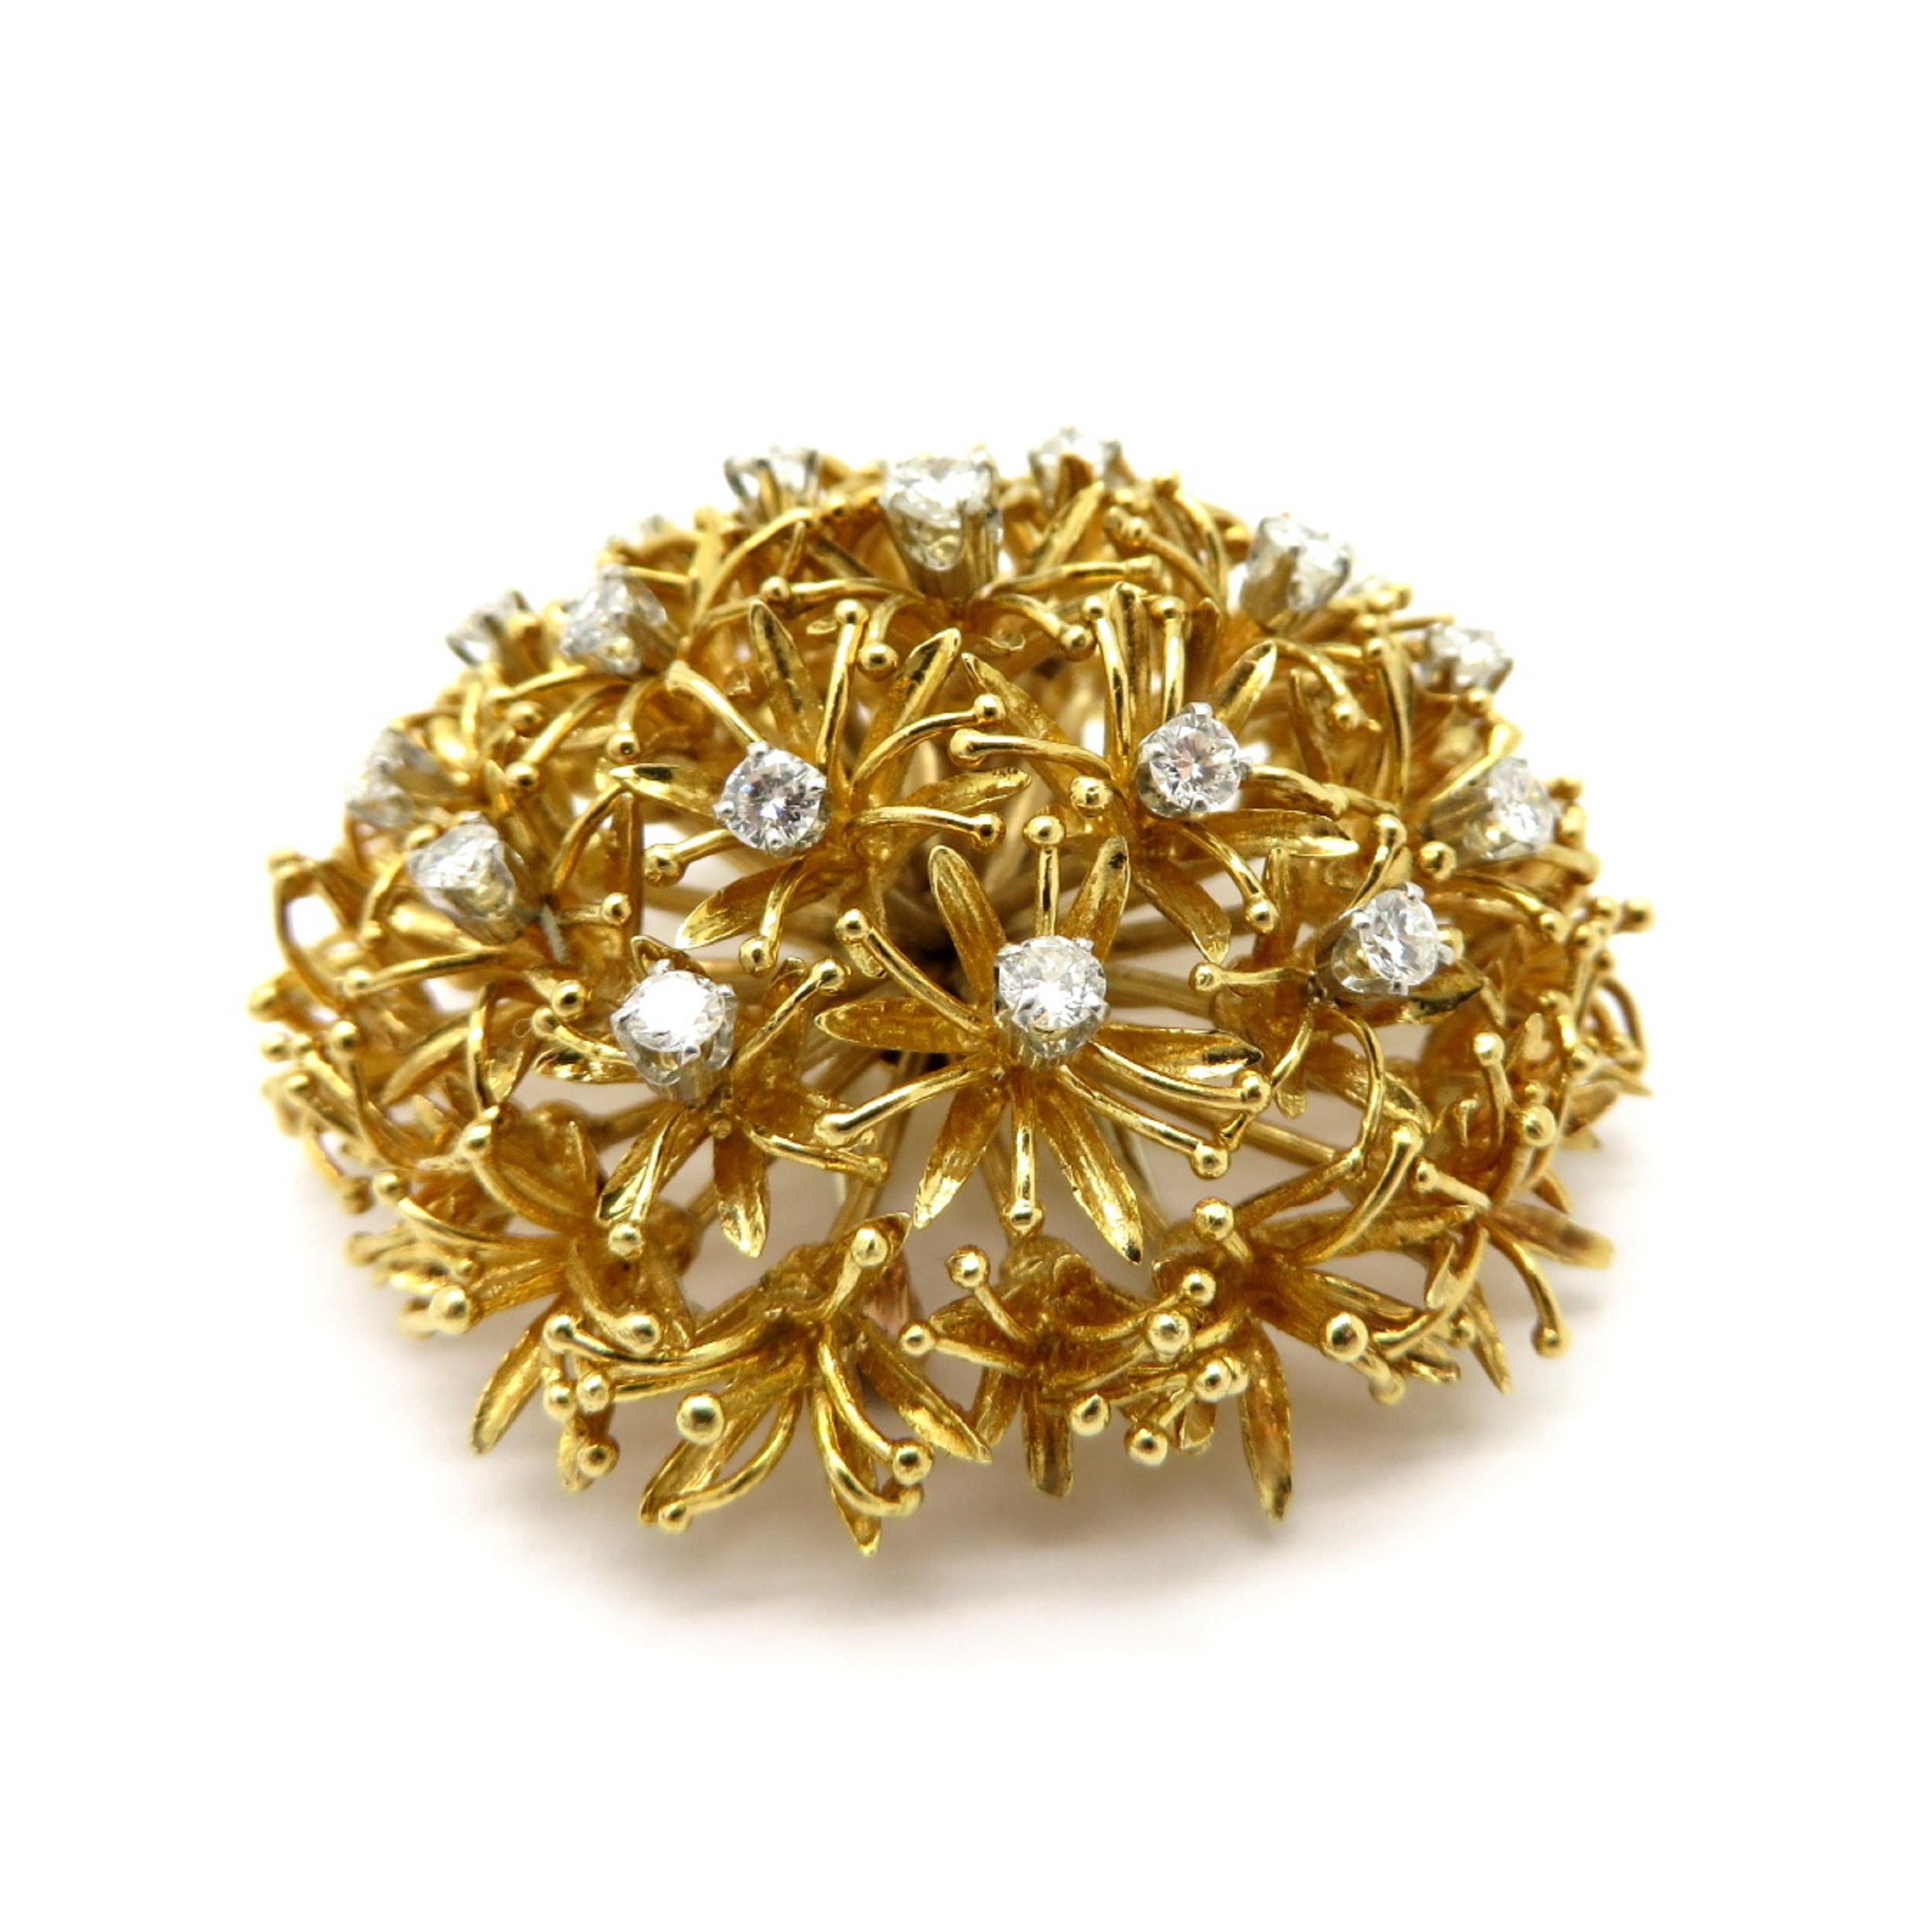 Estate designer David Webb 18K yellow gold and platinum dandelion flower brooch.  Interspersed with 19 round brilliant cut prong set diamonds weighing approximately 1.70 carats. Diamond grading: color grade: F. Clarity grade: VS1. Hallmarked: David